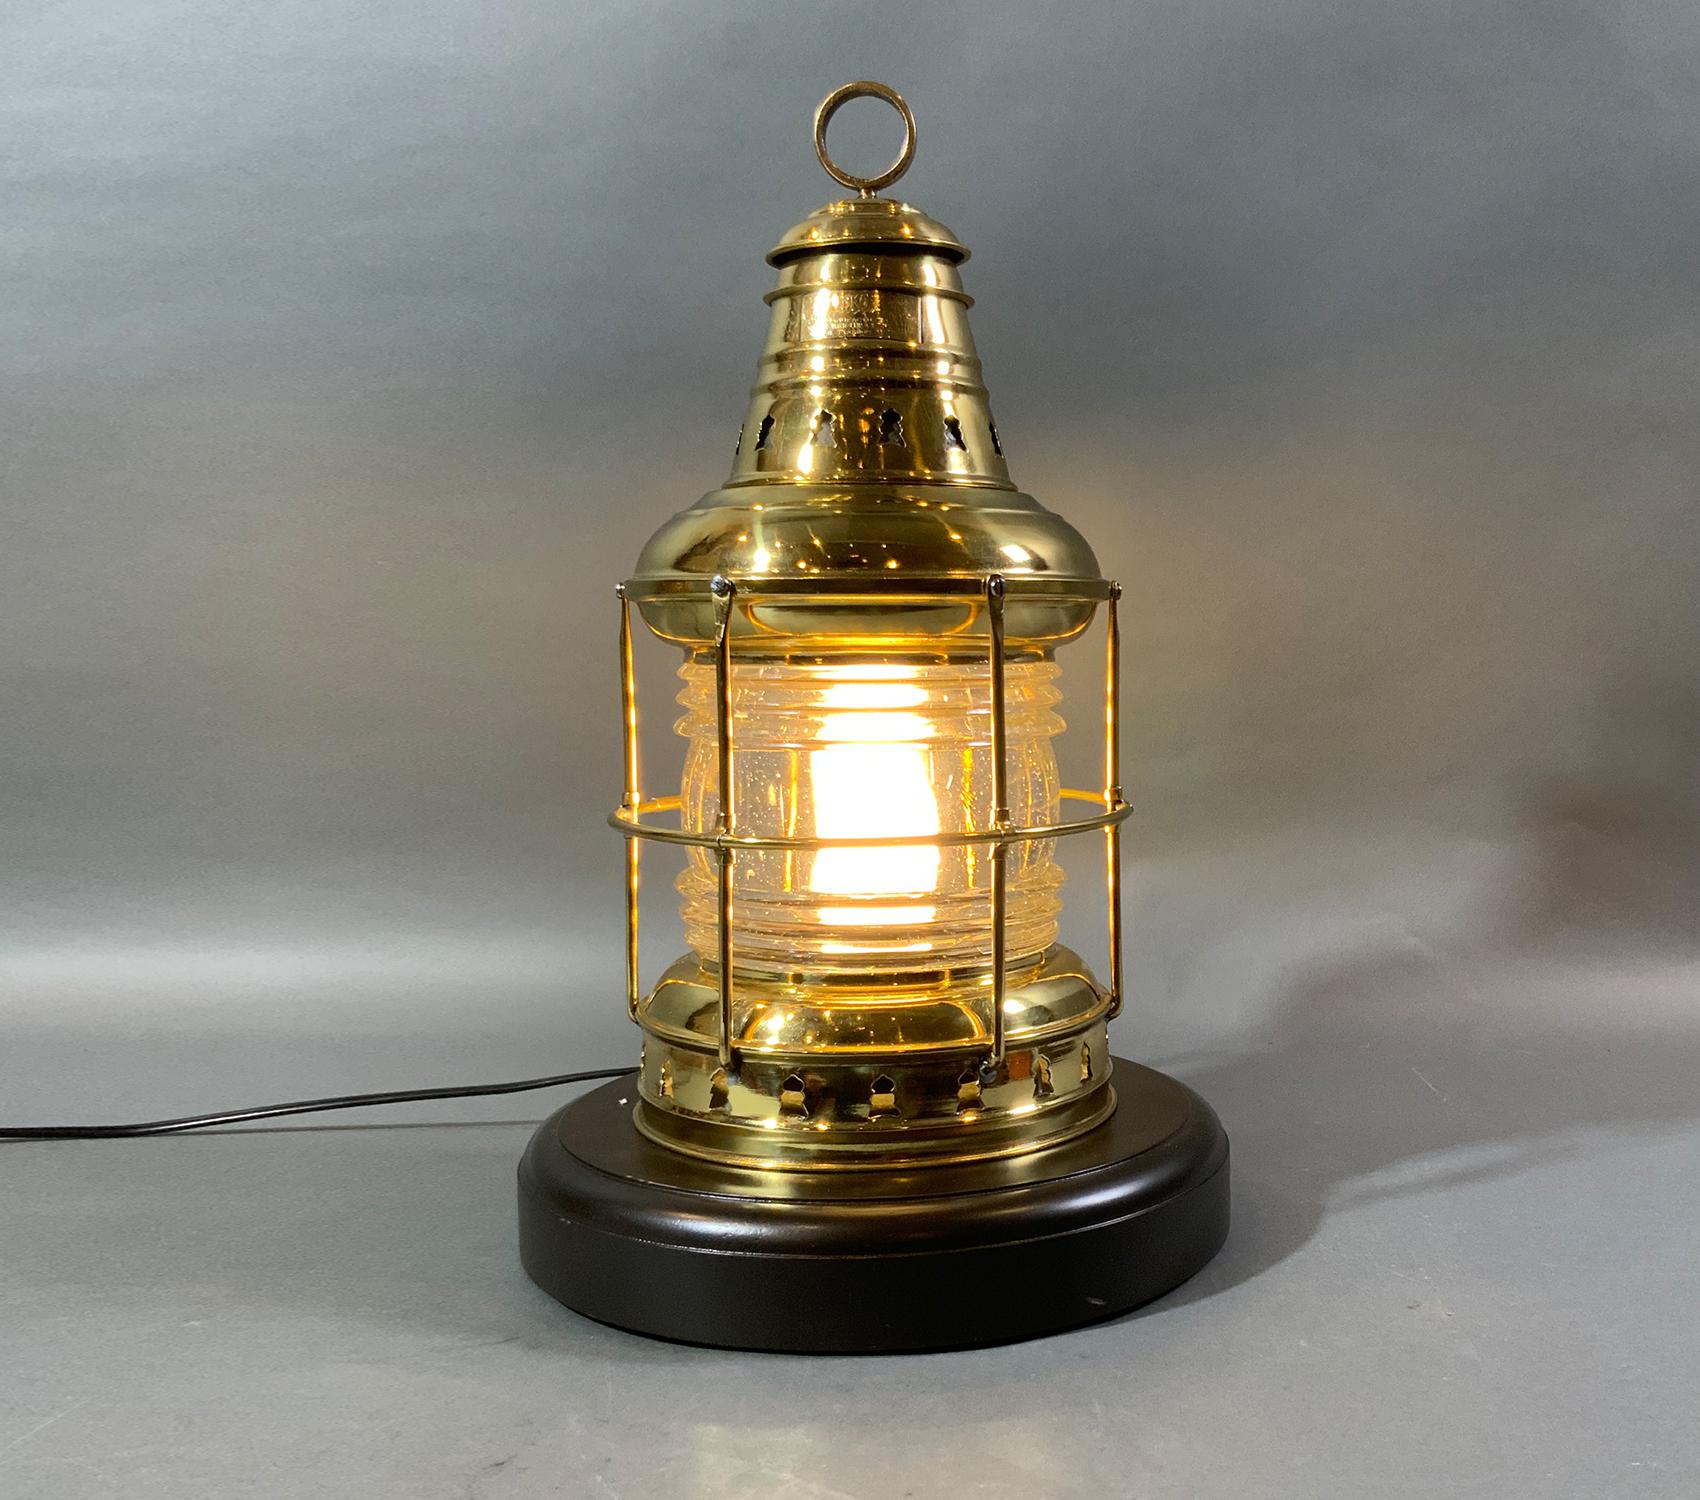 Polished ships lantern by the Perkins Marine Lamp Corporation, also known as Perko. The lantern is fitted with protective brass bars, a Fresnel glass lens, vented top, and hoisting ring. It has been recently rewired for home use. Mounted to a thick